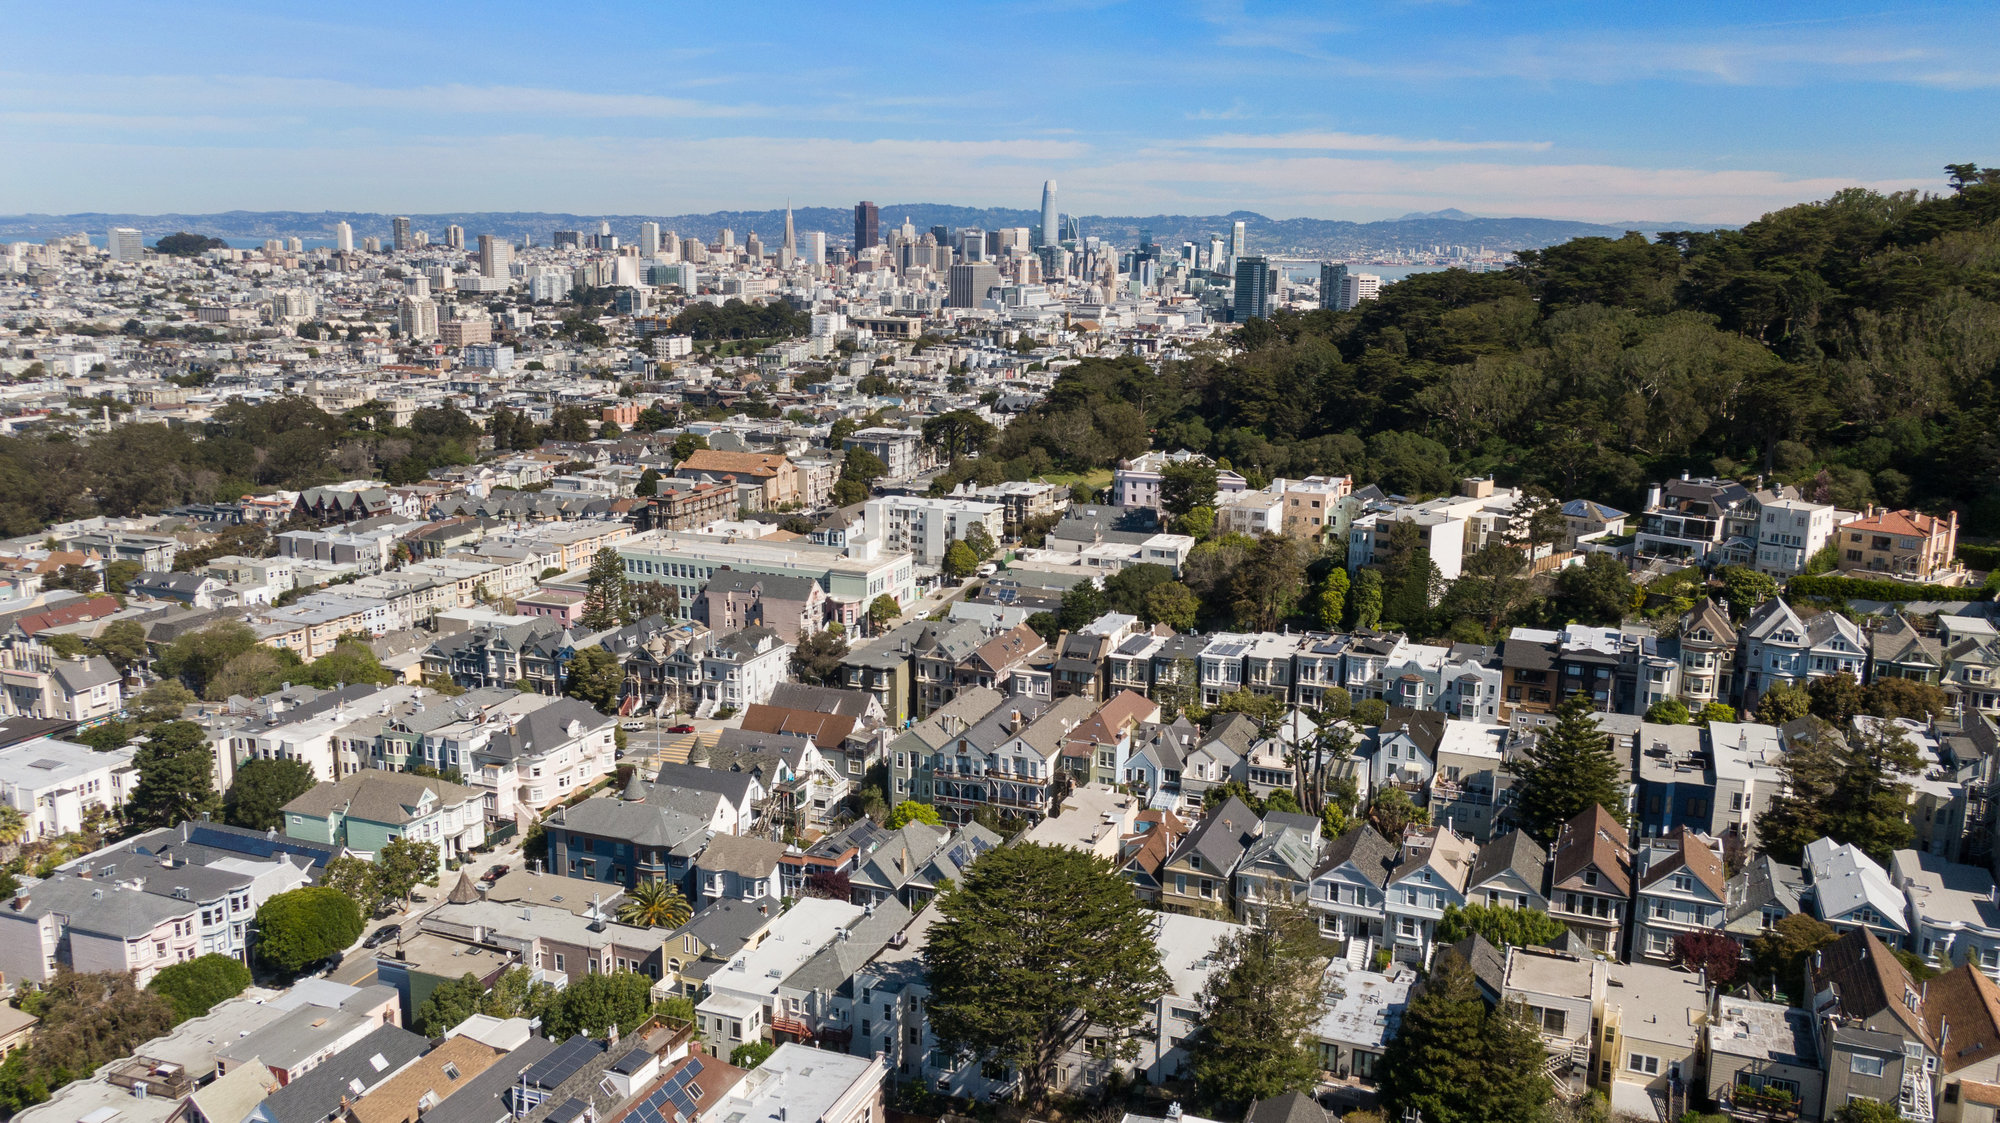 Property Photo: Aerial view of Buena Vista and down town San Francisco